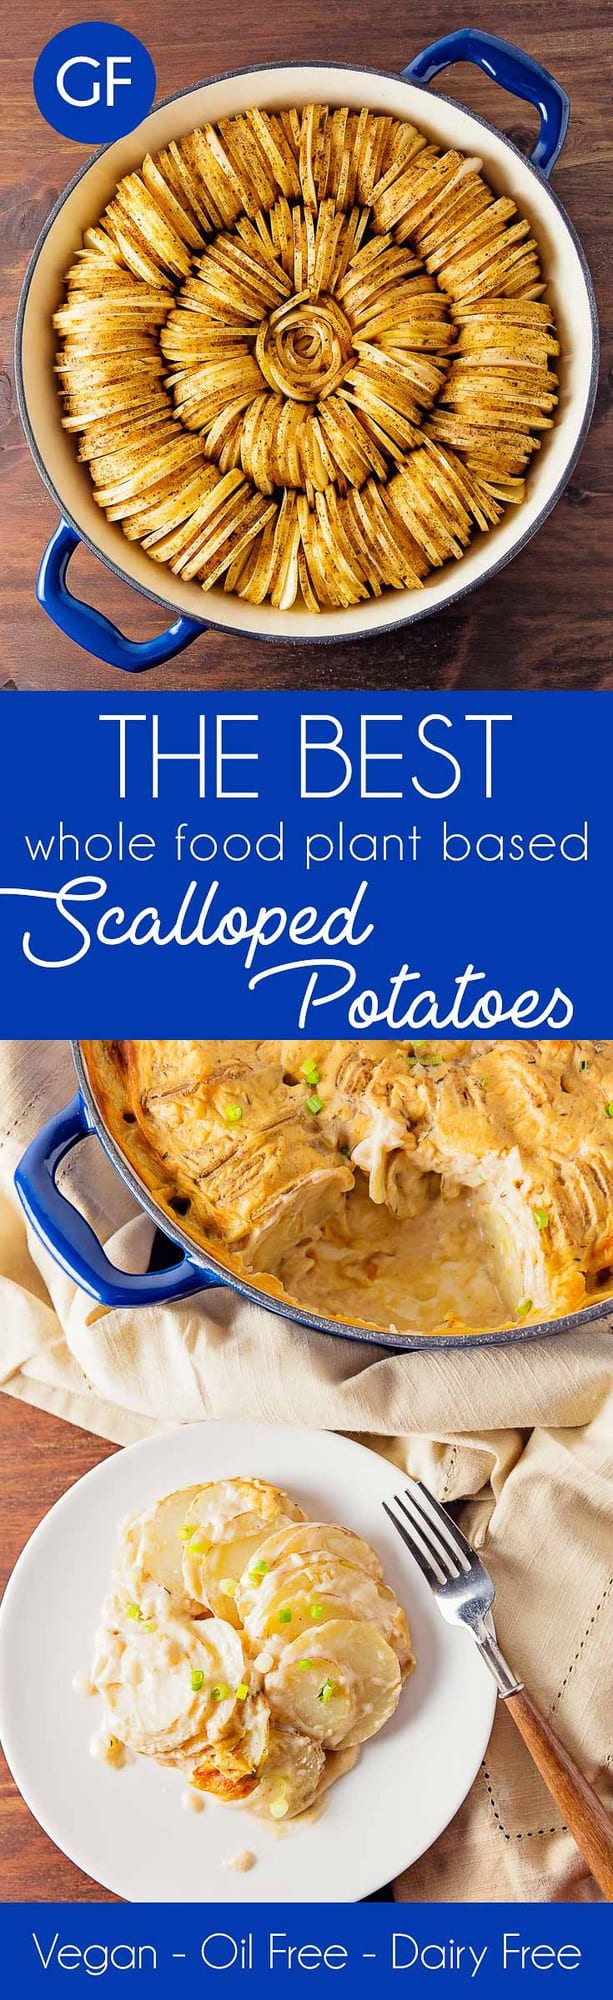 scalloped potatoes, potatoes, vegan, vegetarian, whole food plant based, gluten free, recipe, wfpb, healthy, oil free, no refined sugar, no oil, refined sugar free, dinner, side, side dish, dairy free, entertaining, dinner party